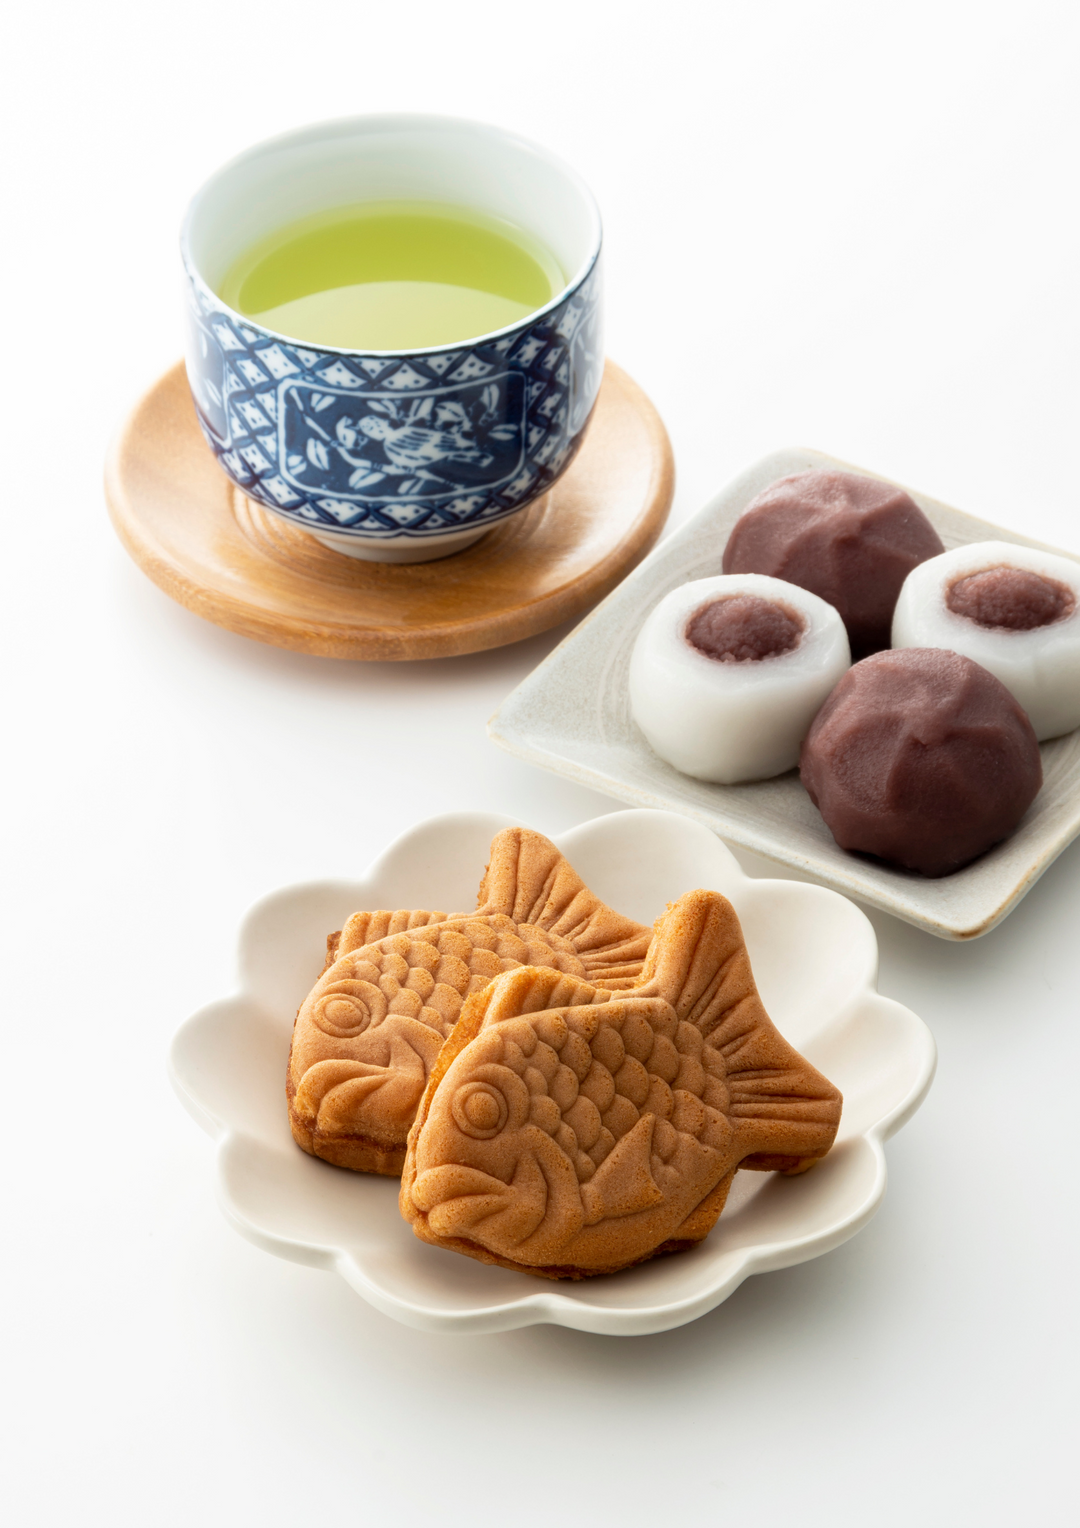 Traditional Japanese wagashi snacks featuring exquisite bean paste fillings.